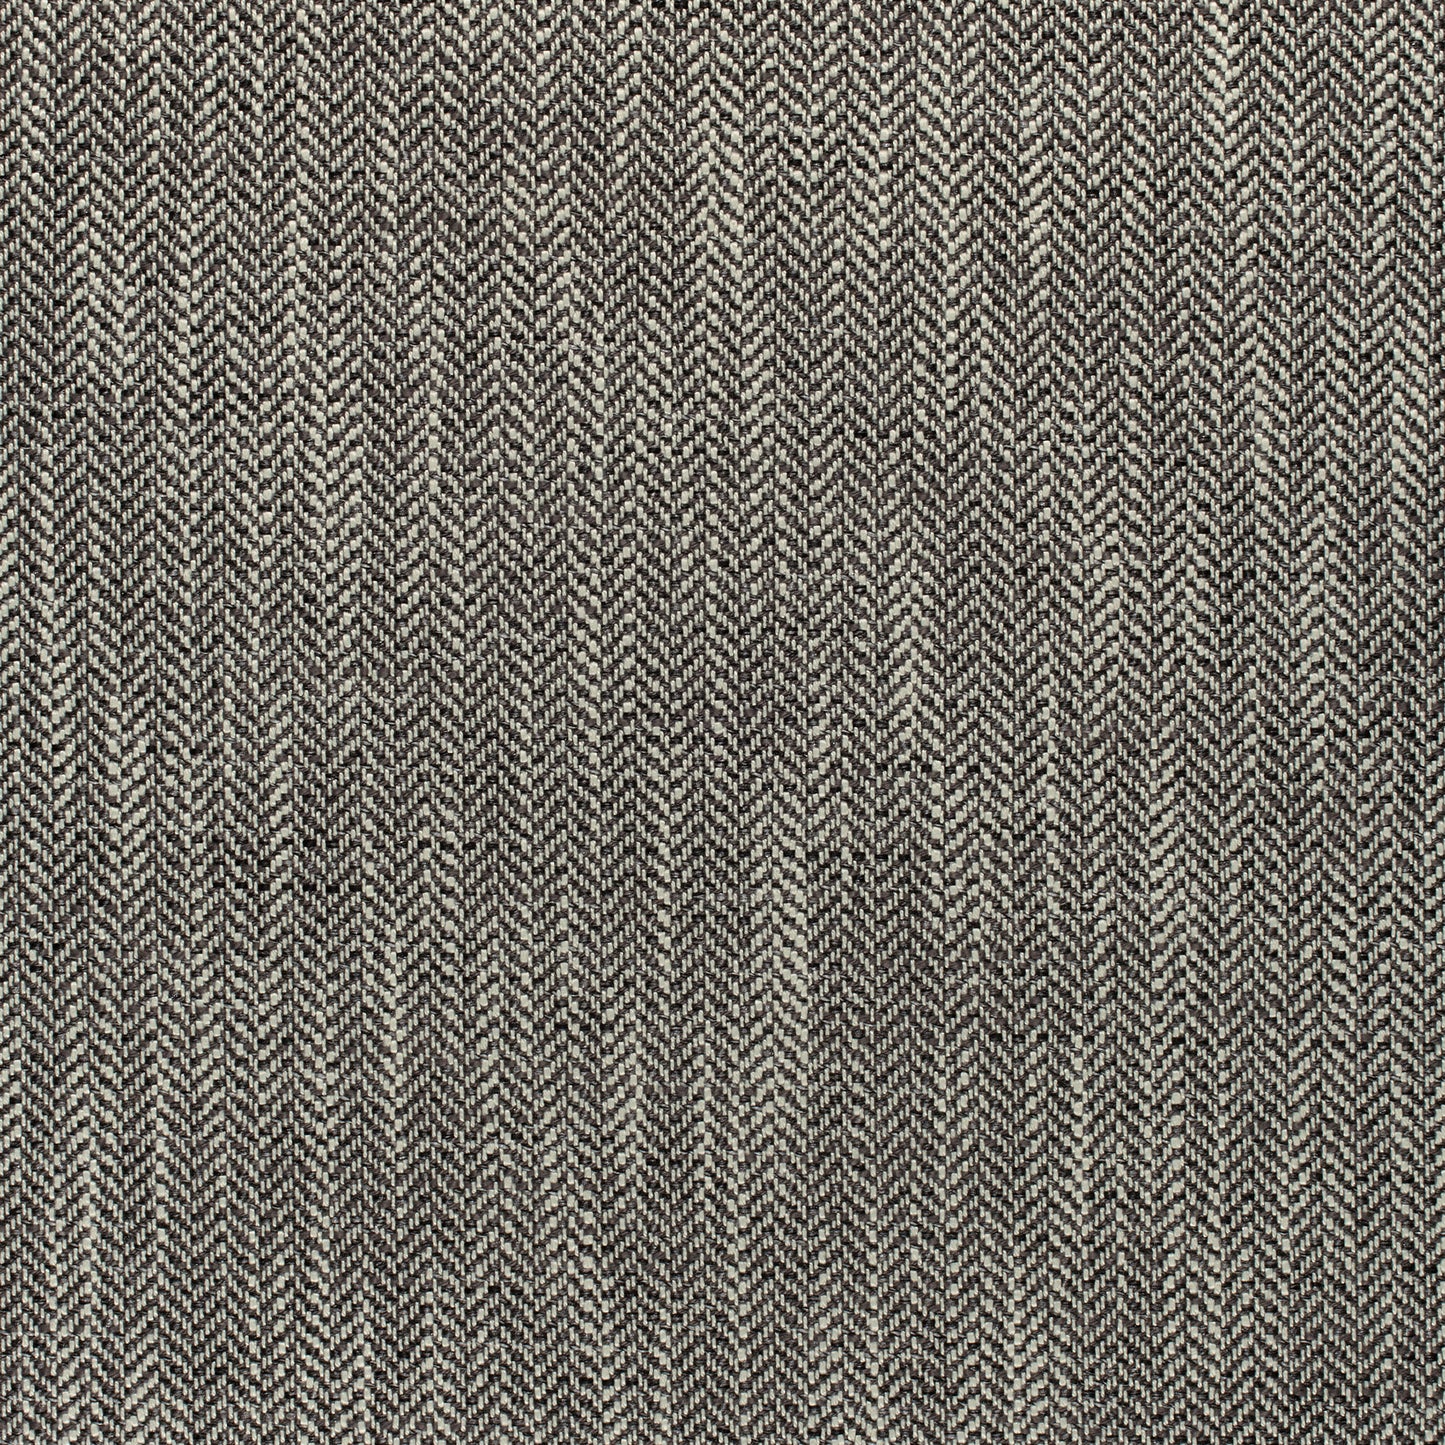 Purchase Thibaut Fabric Product W80618 pattern name Ashbourne Tweed color Black